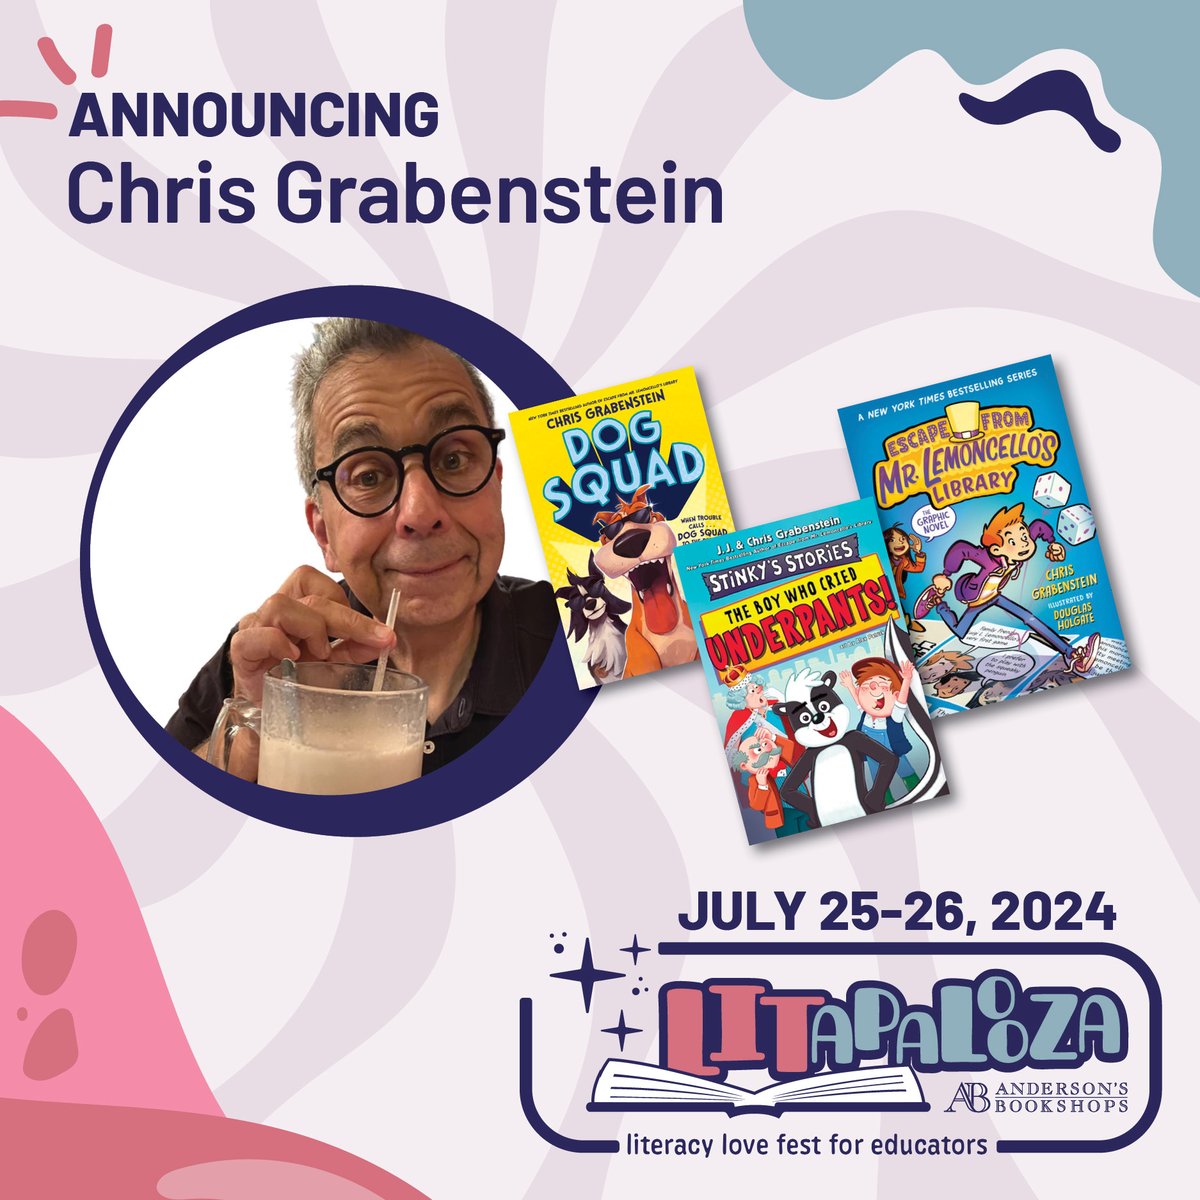 ANNOUNCING : Chris Grabenstein @CGrabenstein will be at LITapalooza 2024! Enjoy a festival of kidlit love with him by registering here: LITapalooza2024.eventcombo.com